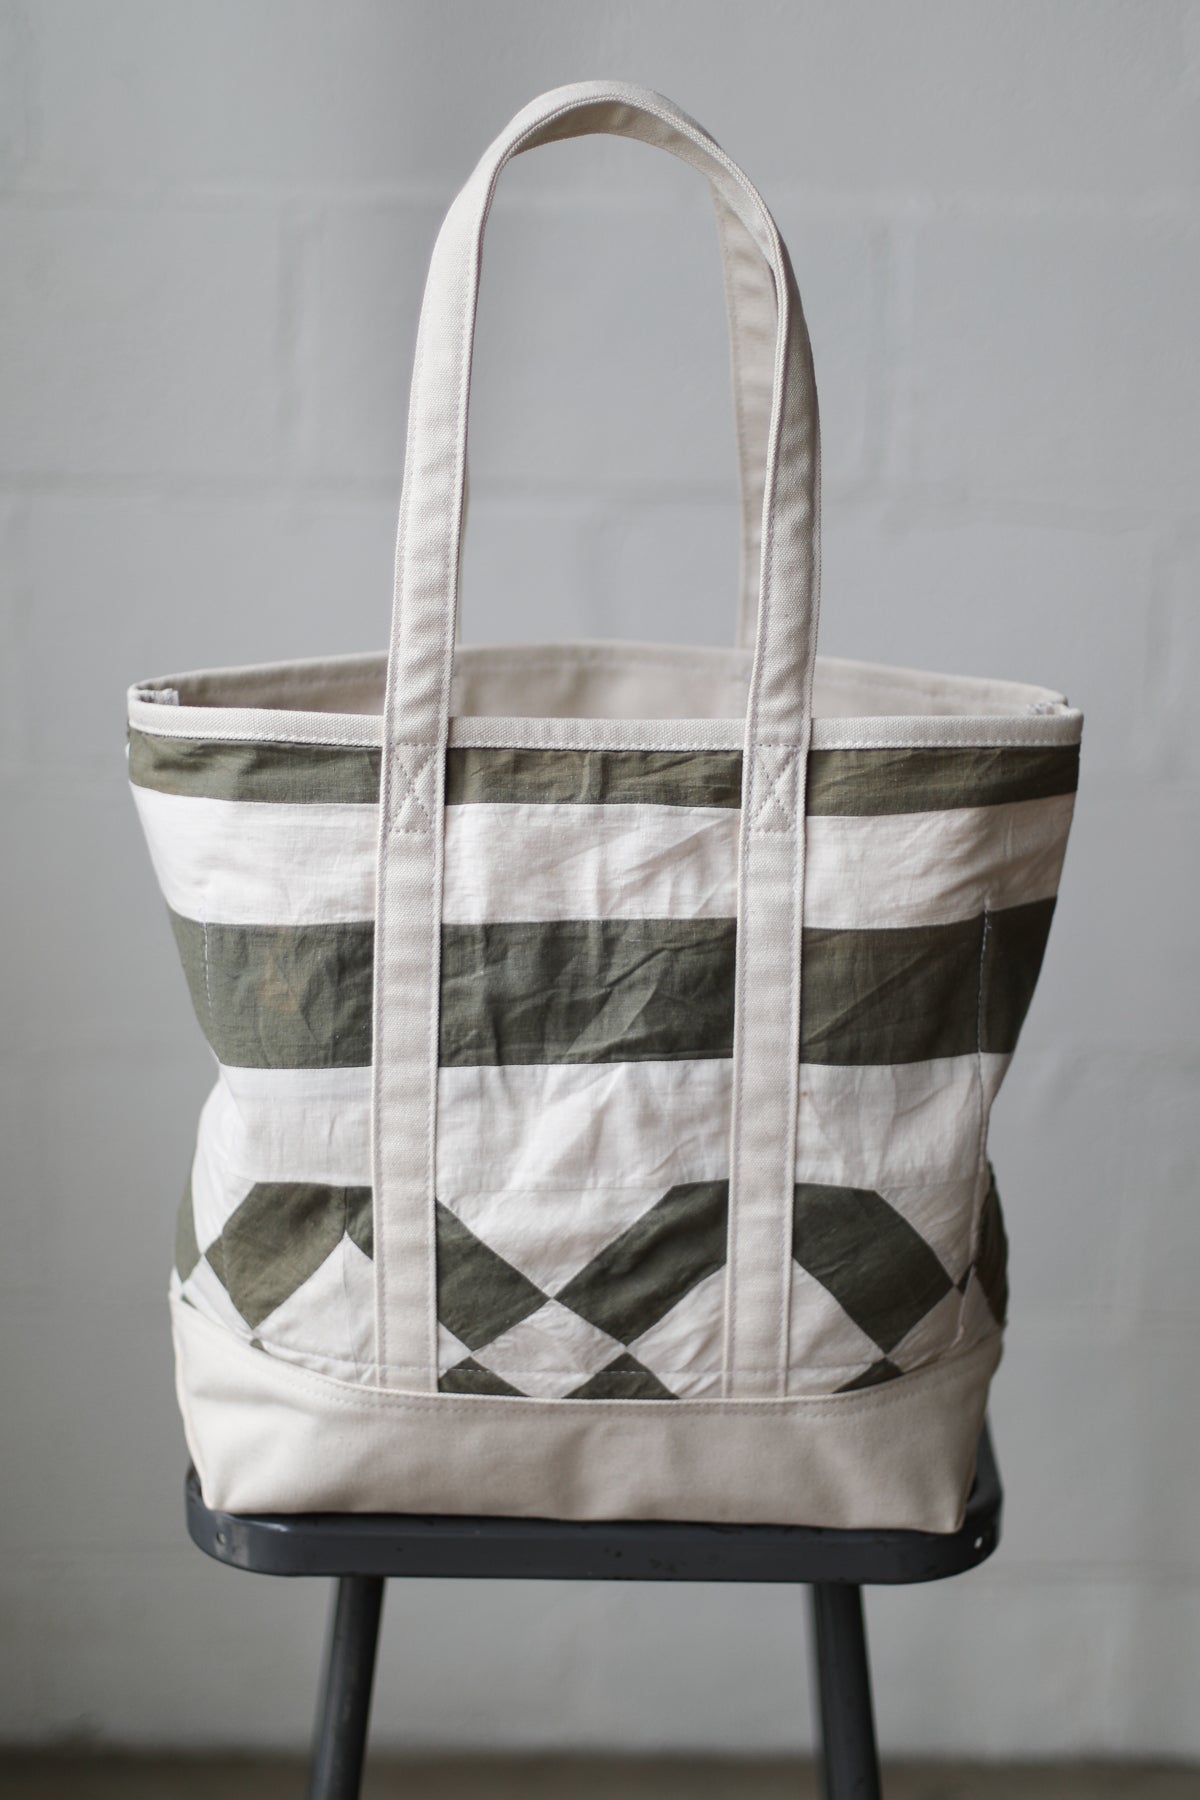 Reclaimed Market Tote No. 001 – FORESTBOUND